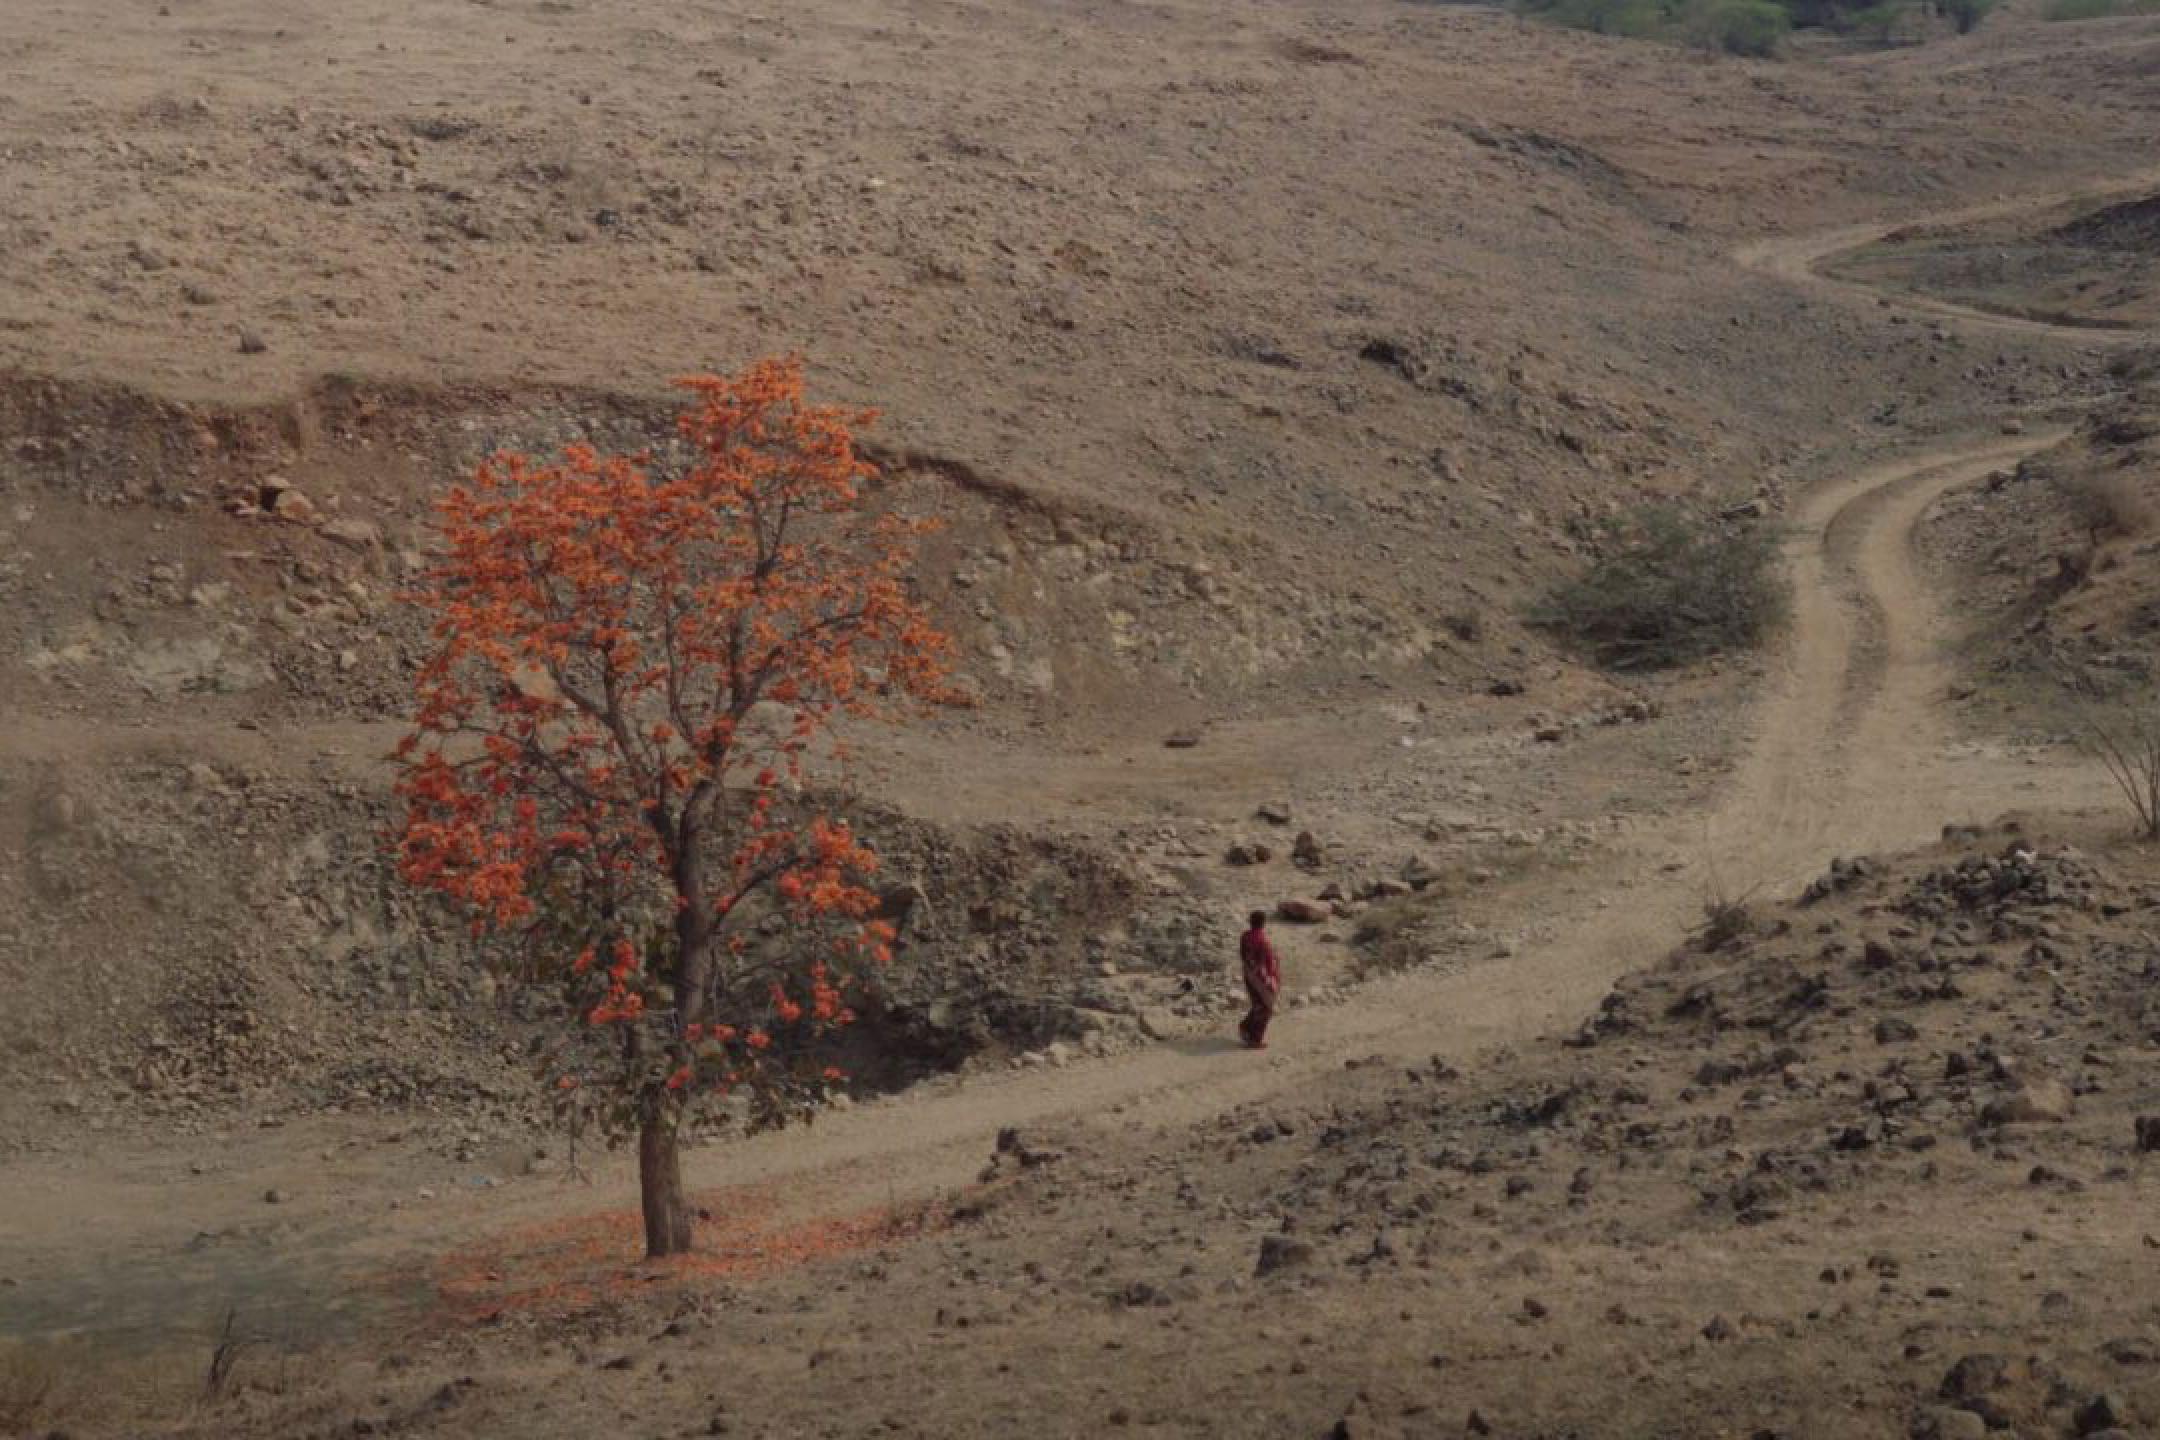 A woman walks through a desert landscape with a single tree with orange leaves.